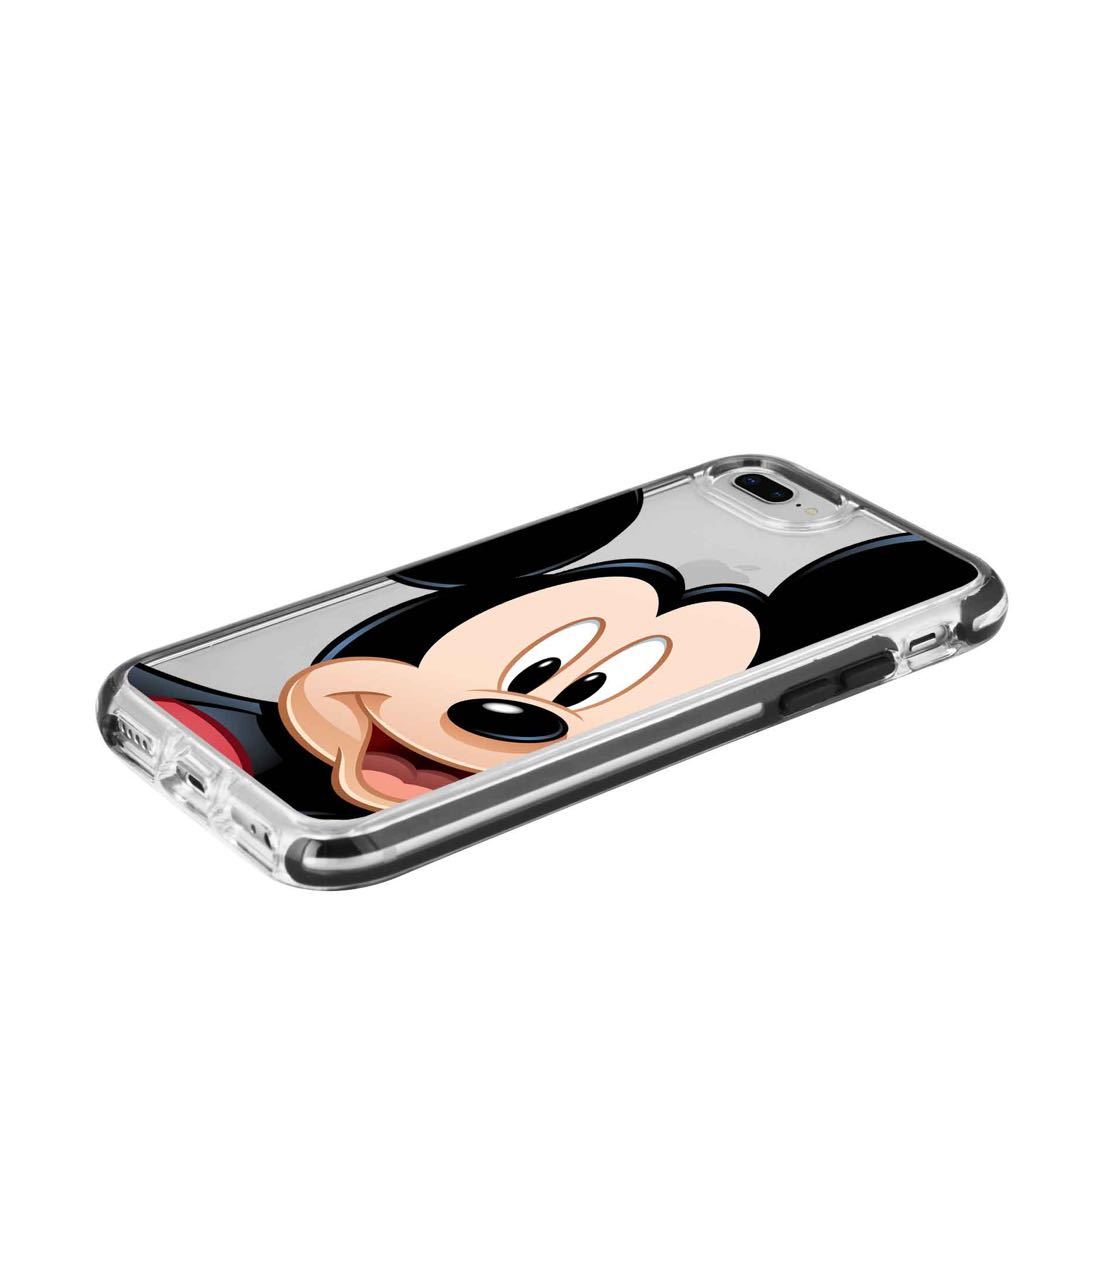 Zoom Up Mickey - Extreme Phone Case for iPhone 8 Plus